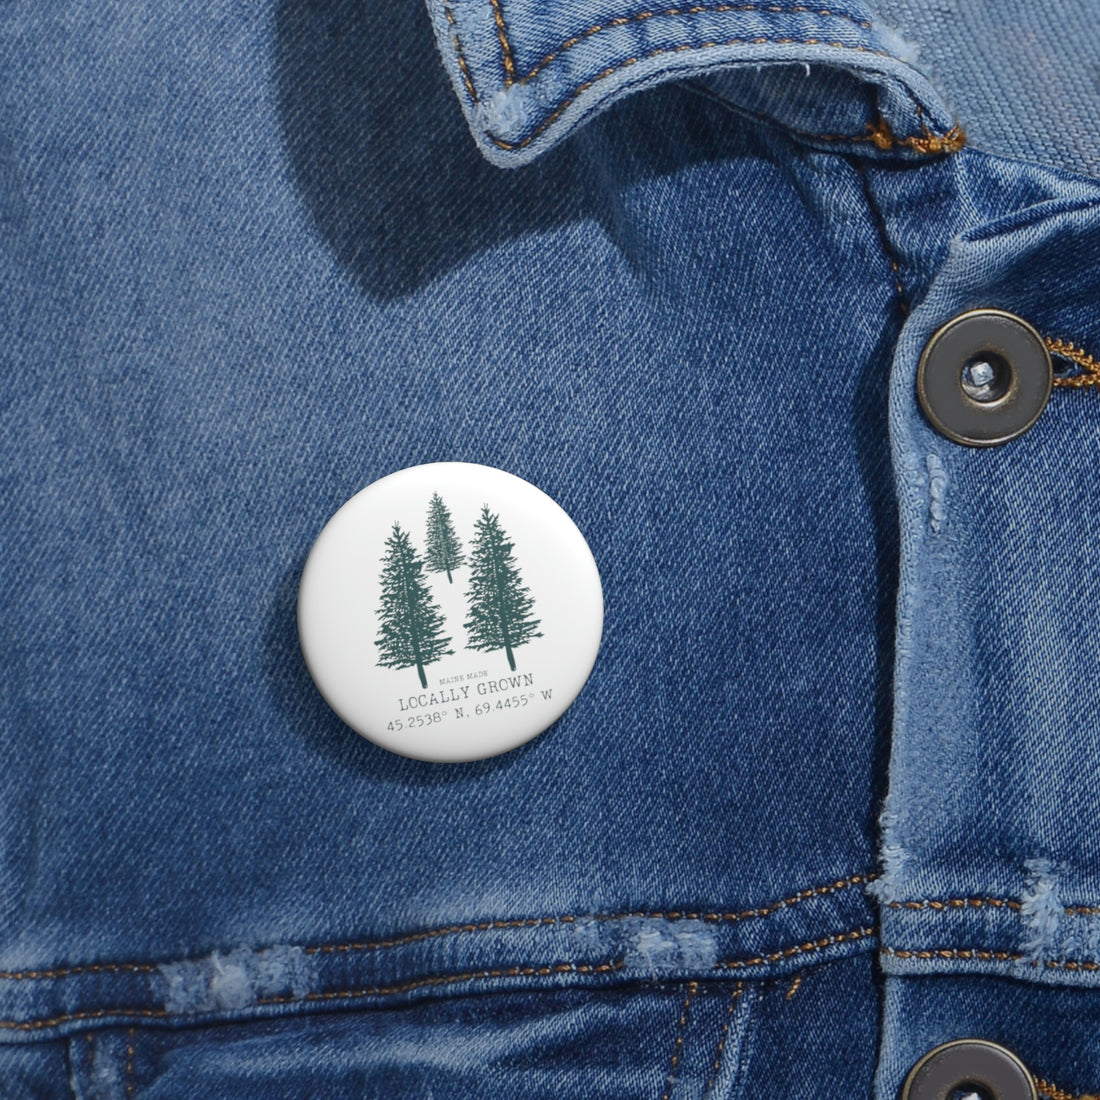 MAINE MADE, LOCALLY OWNED PINS